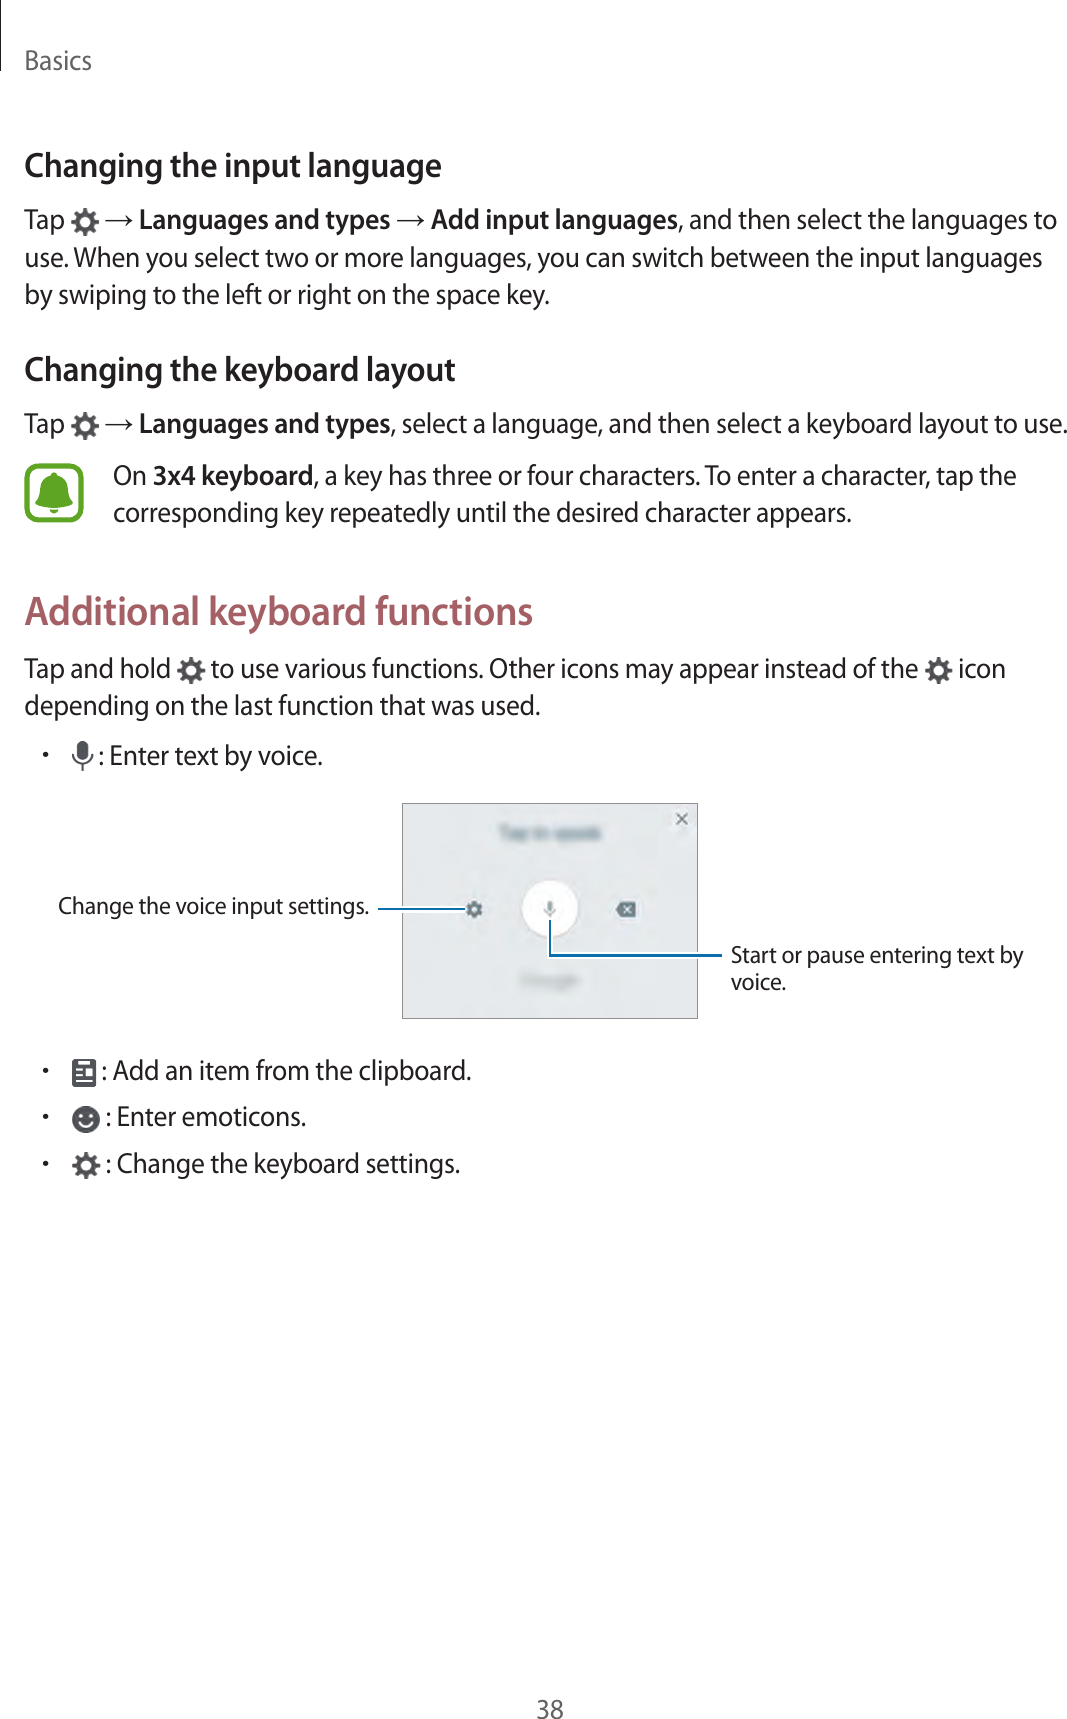 Basics38Changing the input languageTap   → Languages and types → Add input languages, and then select the languages to use. When you select two or more languages, you can switch between the input languages by swiping to the left or right on the space key.Changing the keyboard layoutTap   → Languages and types, select a language, and then select a keyboard layout to use.On 3x4 keyboard, a key has three or four characters. To enter a character, tap the corresponding key repeatedly until the desired character appears.Additional keyboard functionsTap and hold   to use various functions. Other icons may appear instead of the   icon depending on the last function that was used.• : Enter text by voice.Change the voice input settings.Start or pause entering text by voice.• : Add an item from the clipboard.• : Enter emoticons.• : Change the keyboard settings.